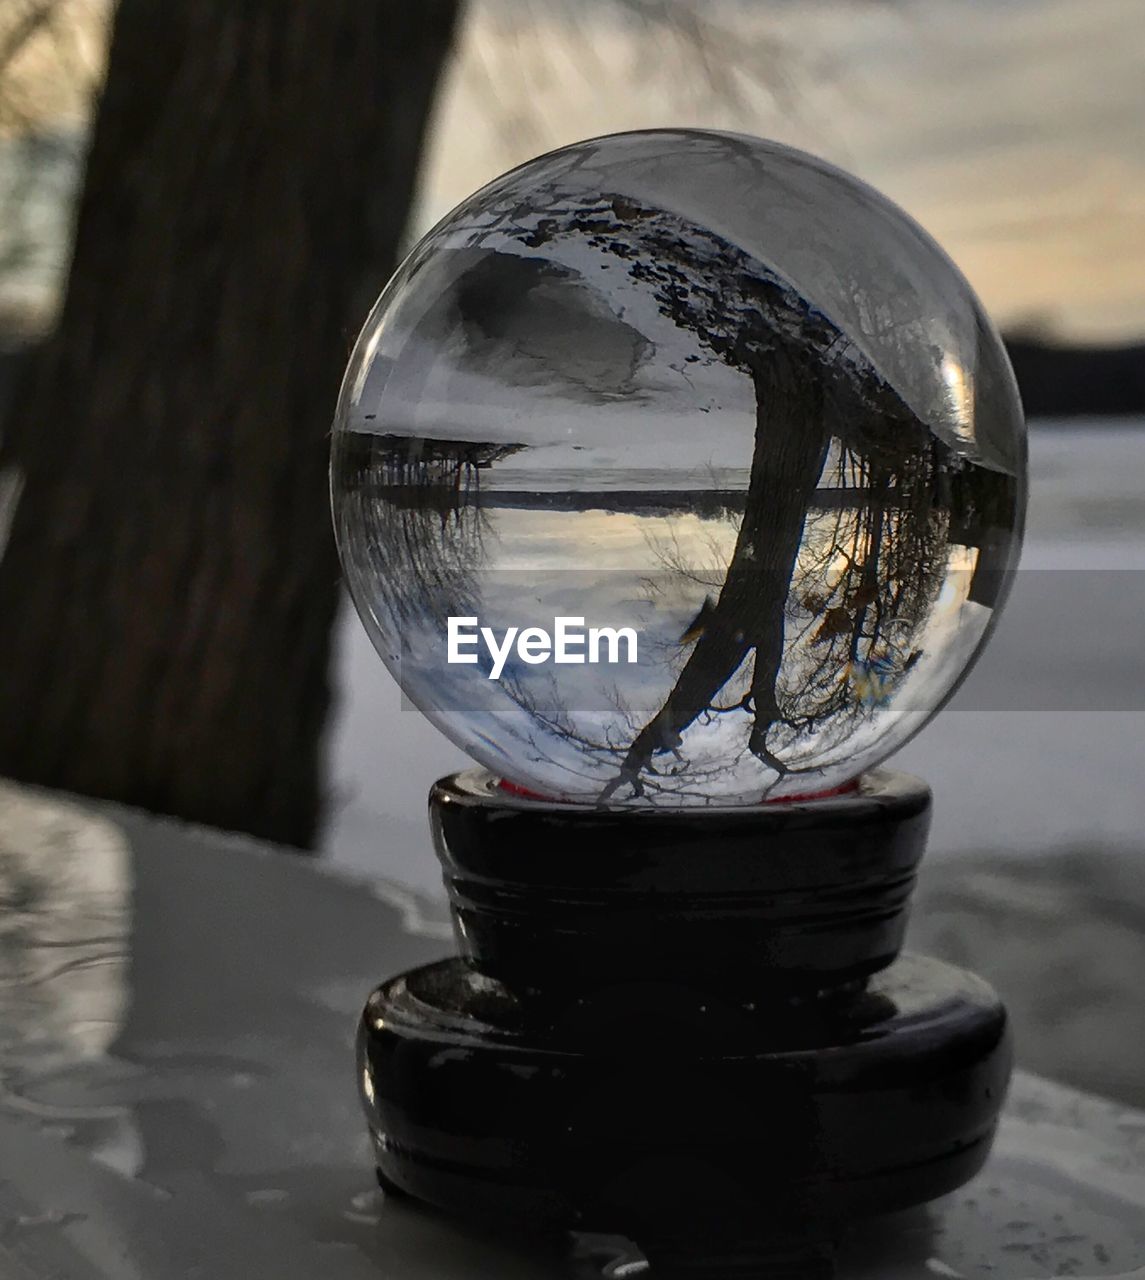 CLOSE-UP OF CRYSTAL BALL WITH REFLECTION ON GLASS